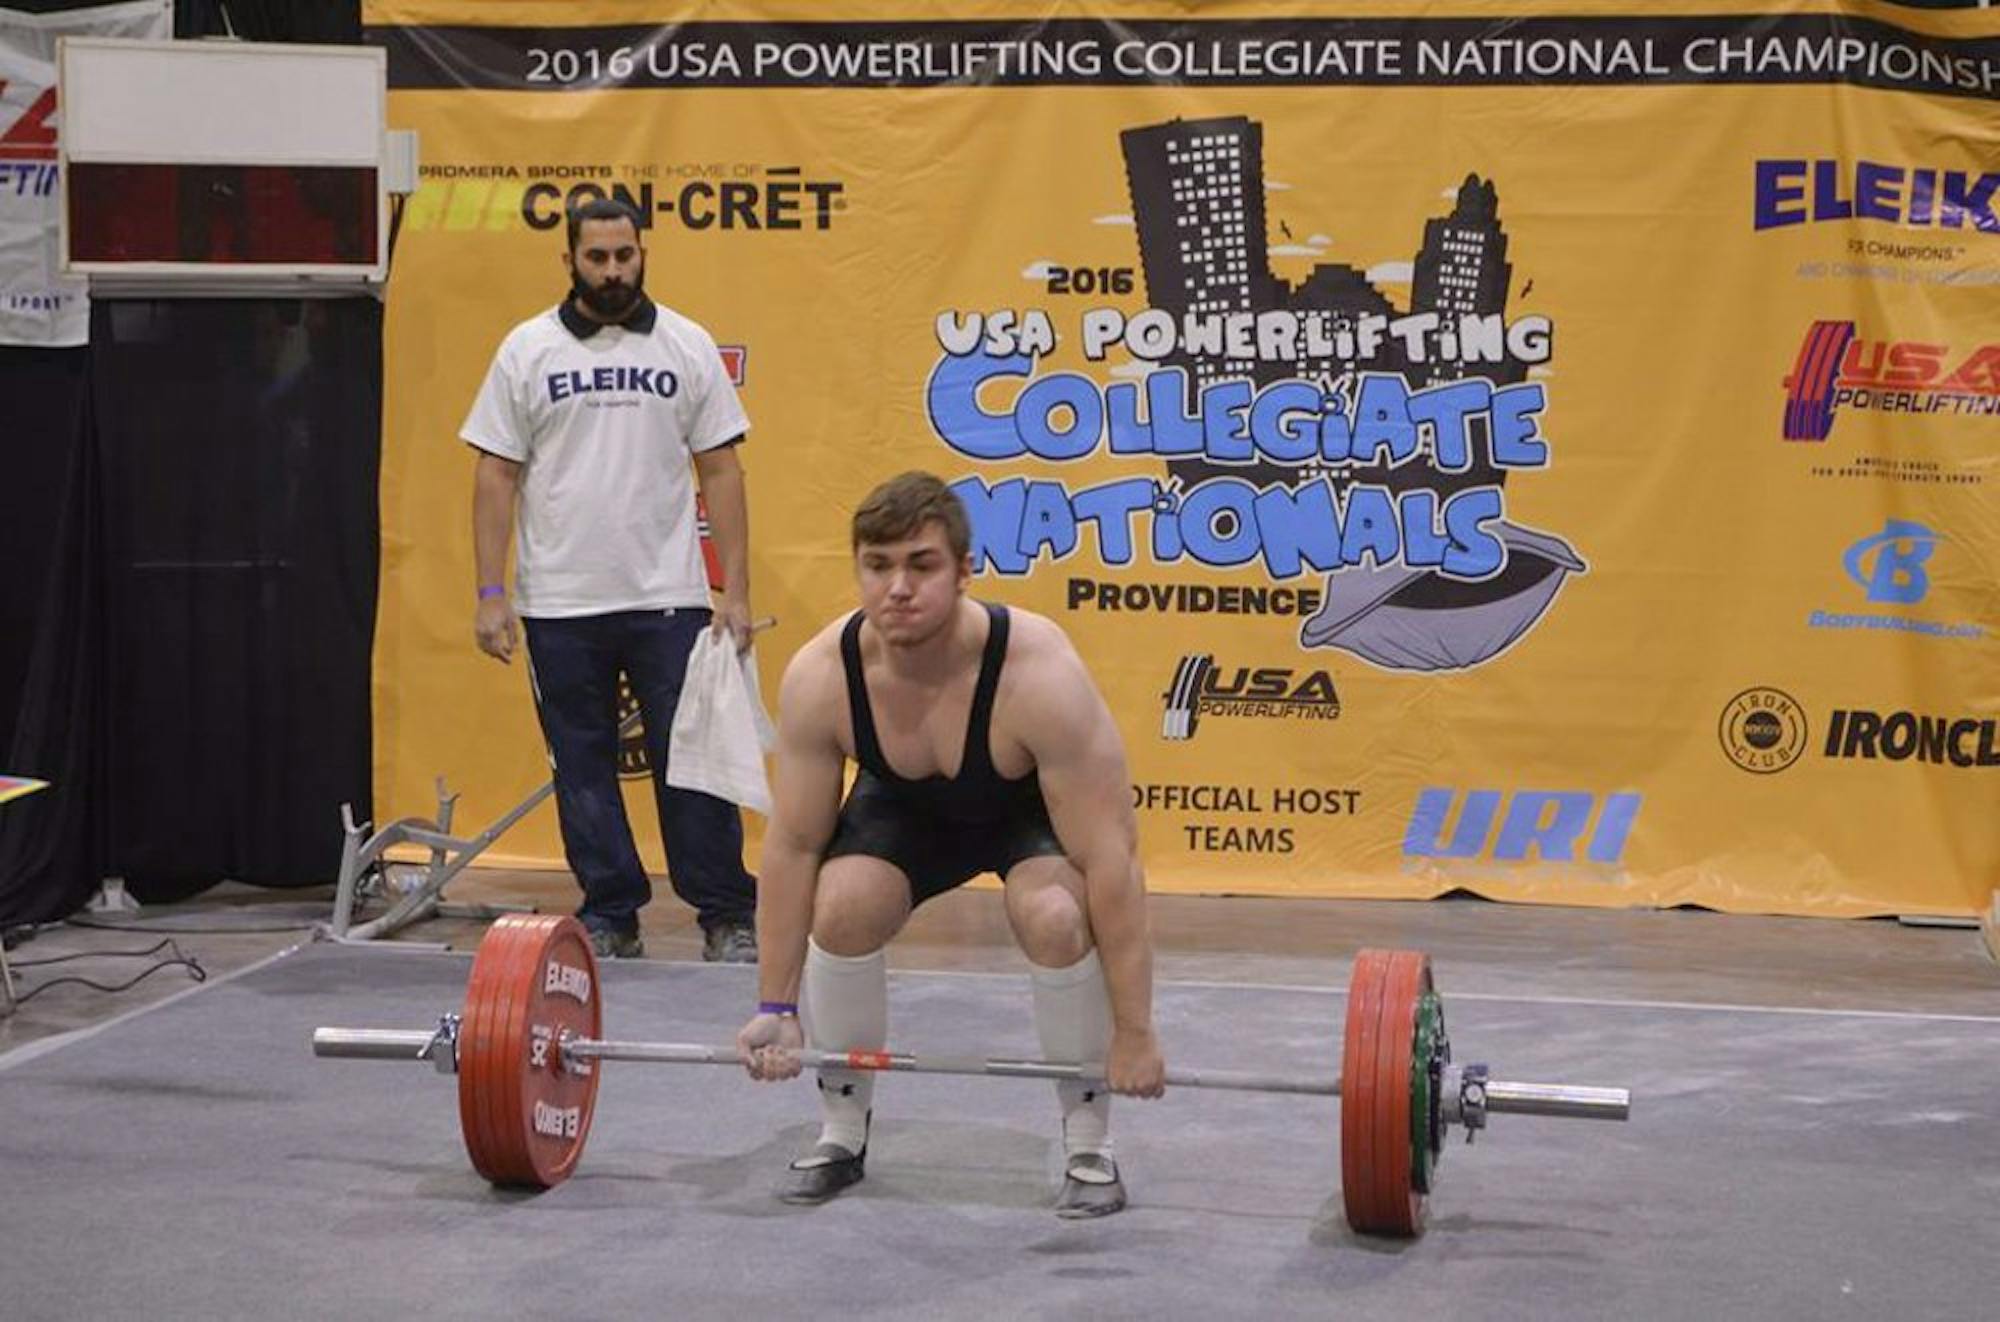 Drake Corbin ’17 pulled 232.5 kilograms during the U.S.A. Powerlifting Collegiate National Championships.